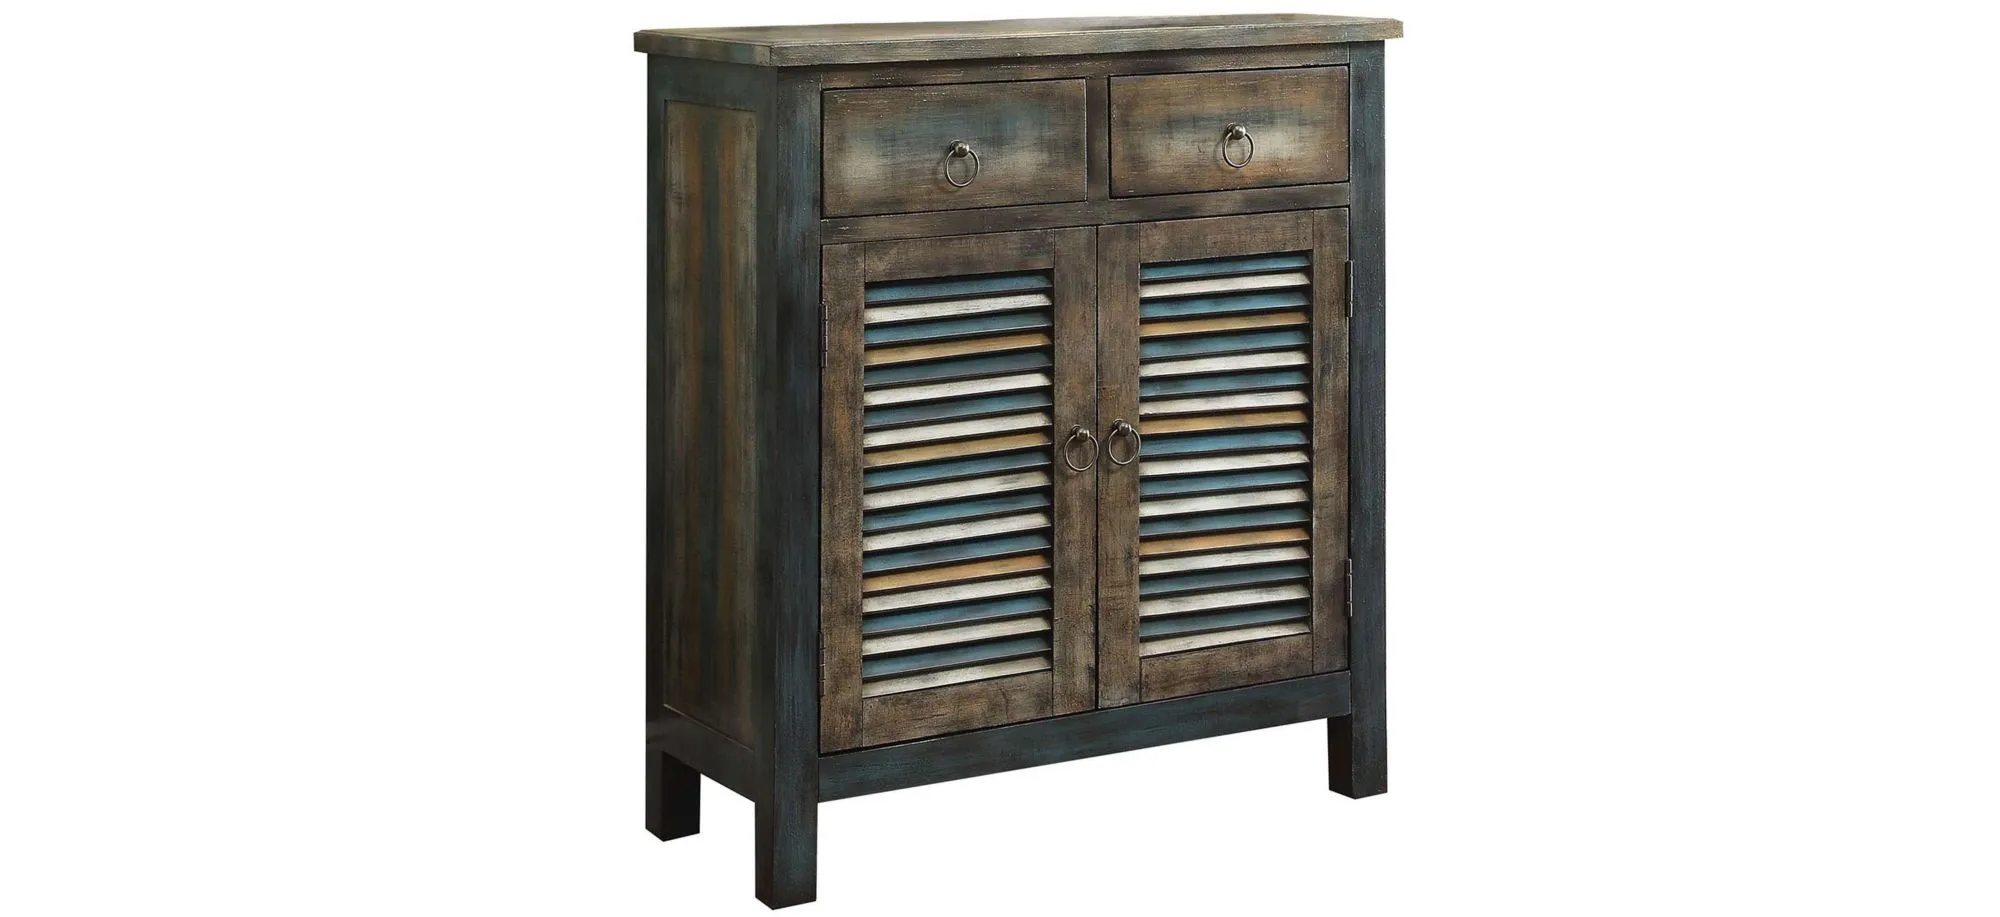 Glancio Console Cabinet in Teal by Acme Furniture Industry